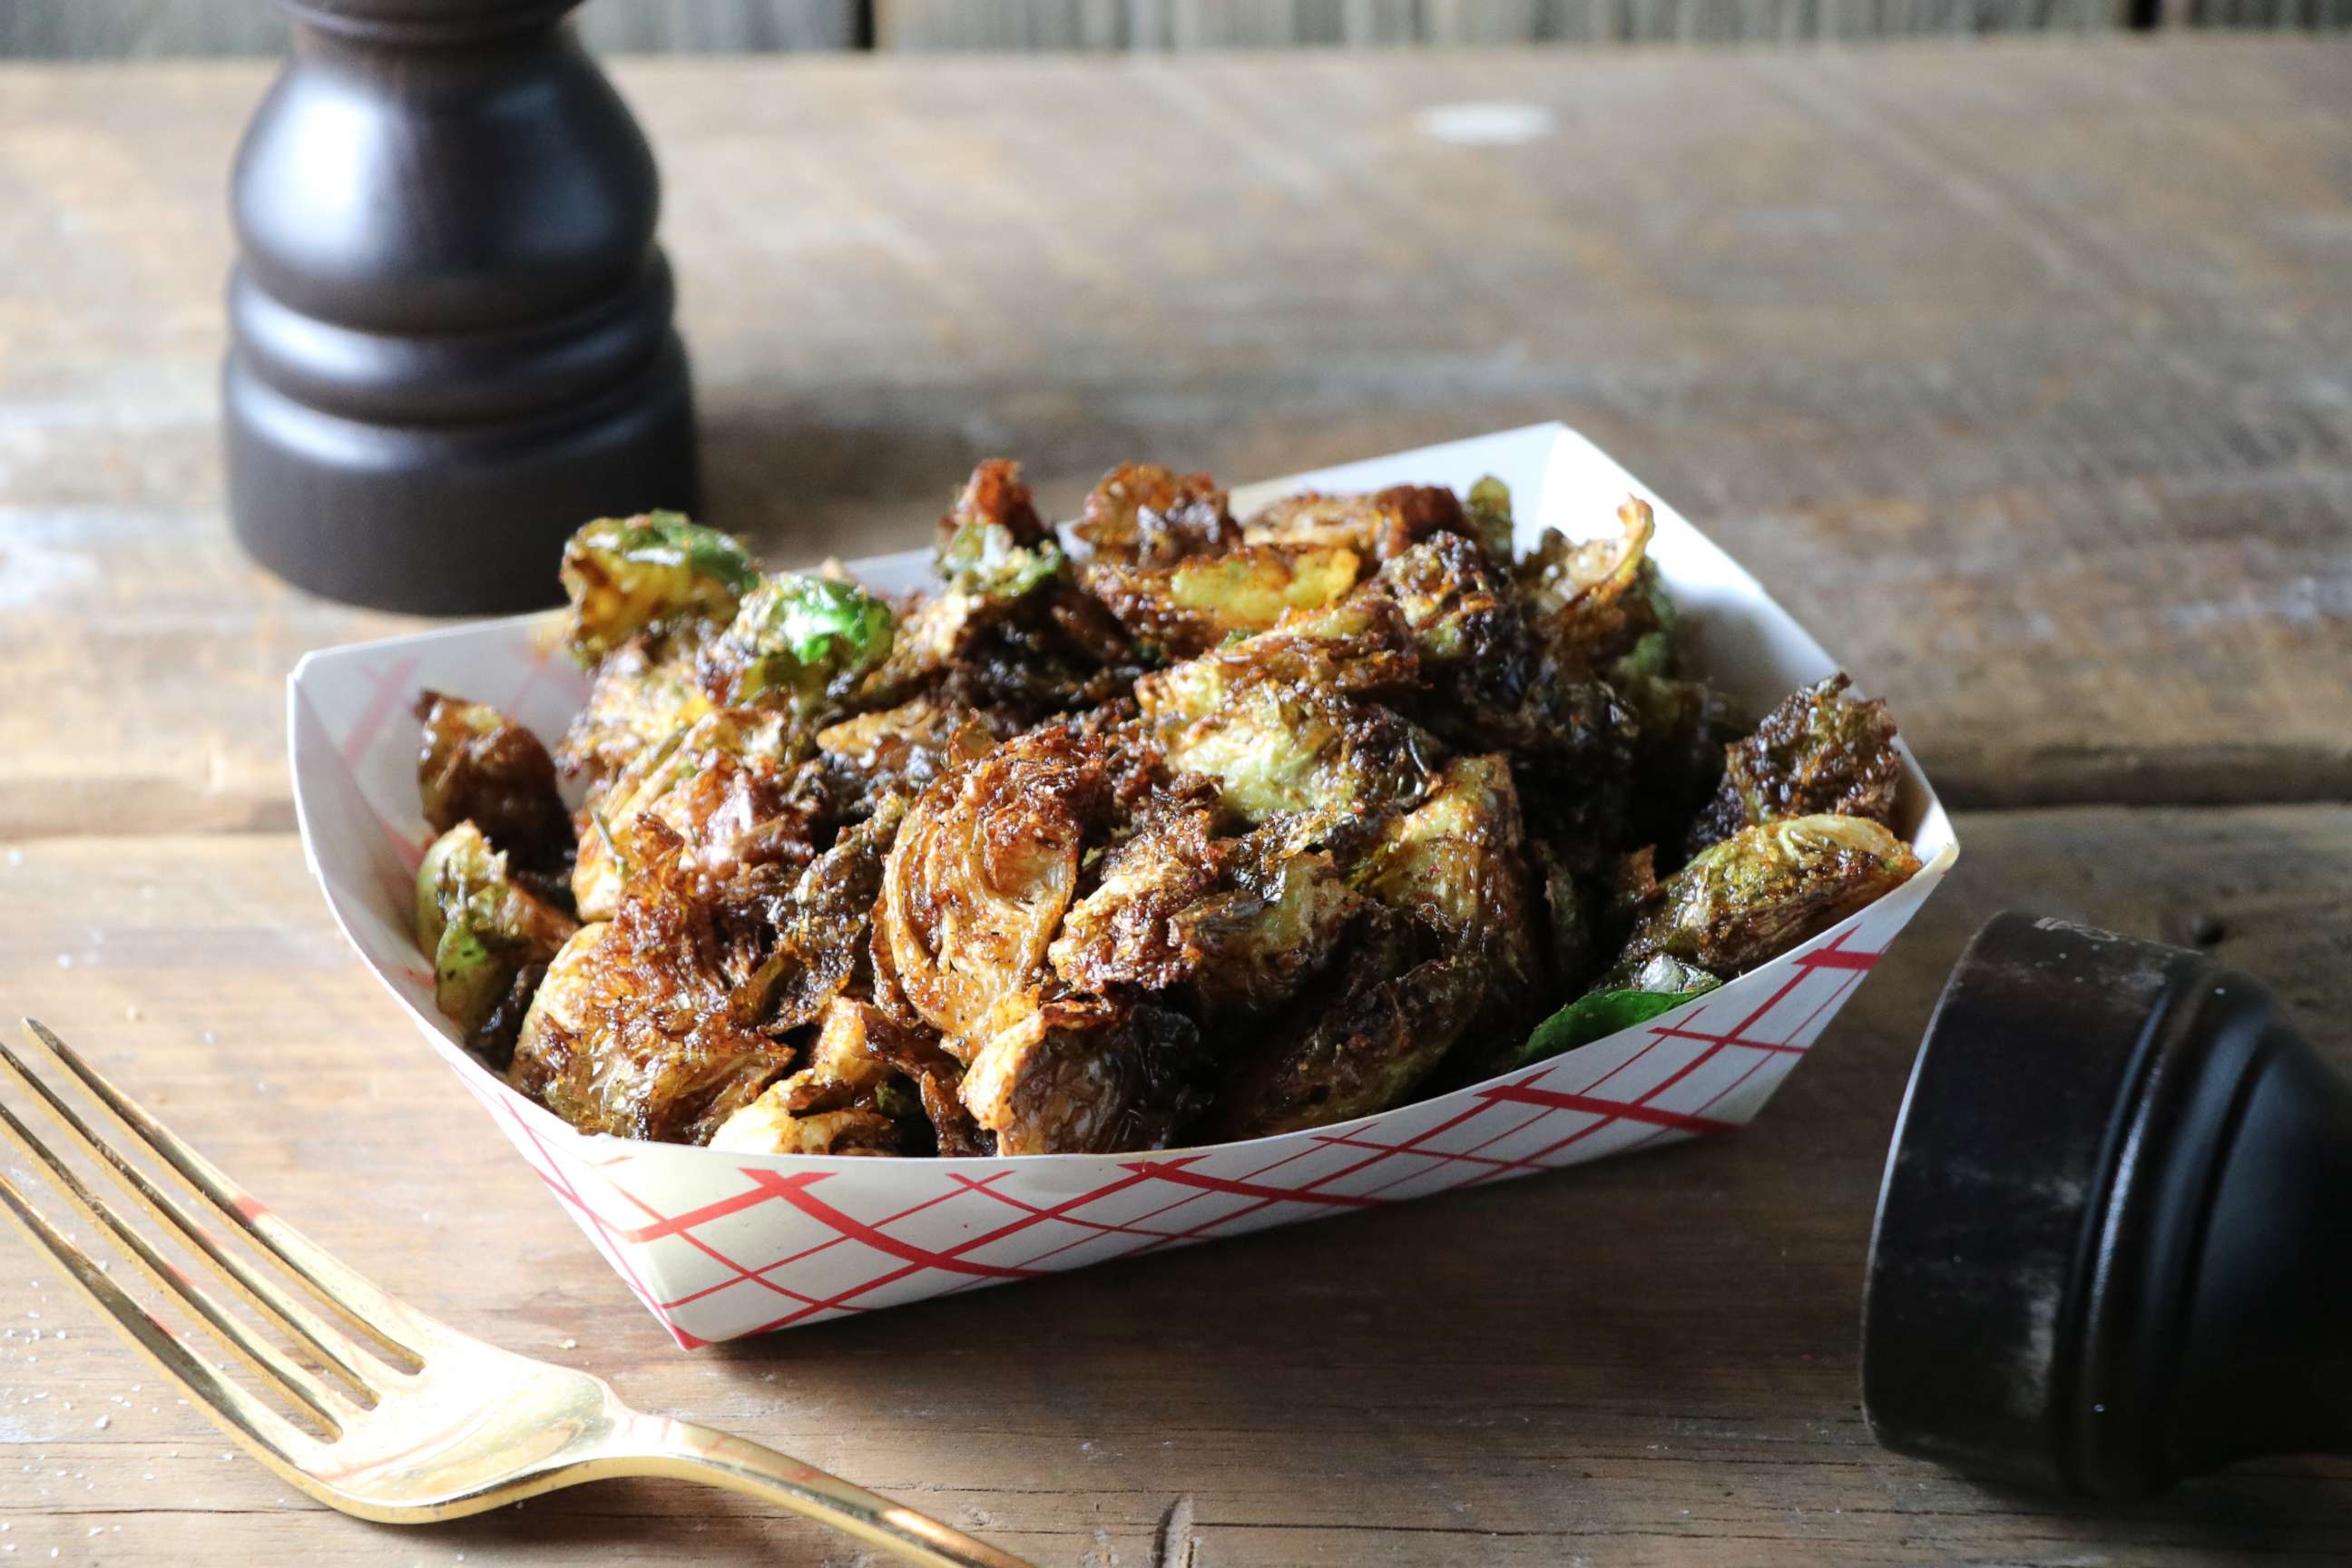 PHOTO: Crispy Brussels sprouts from Federalist Pig in Washington D.C.